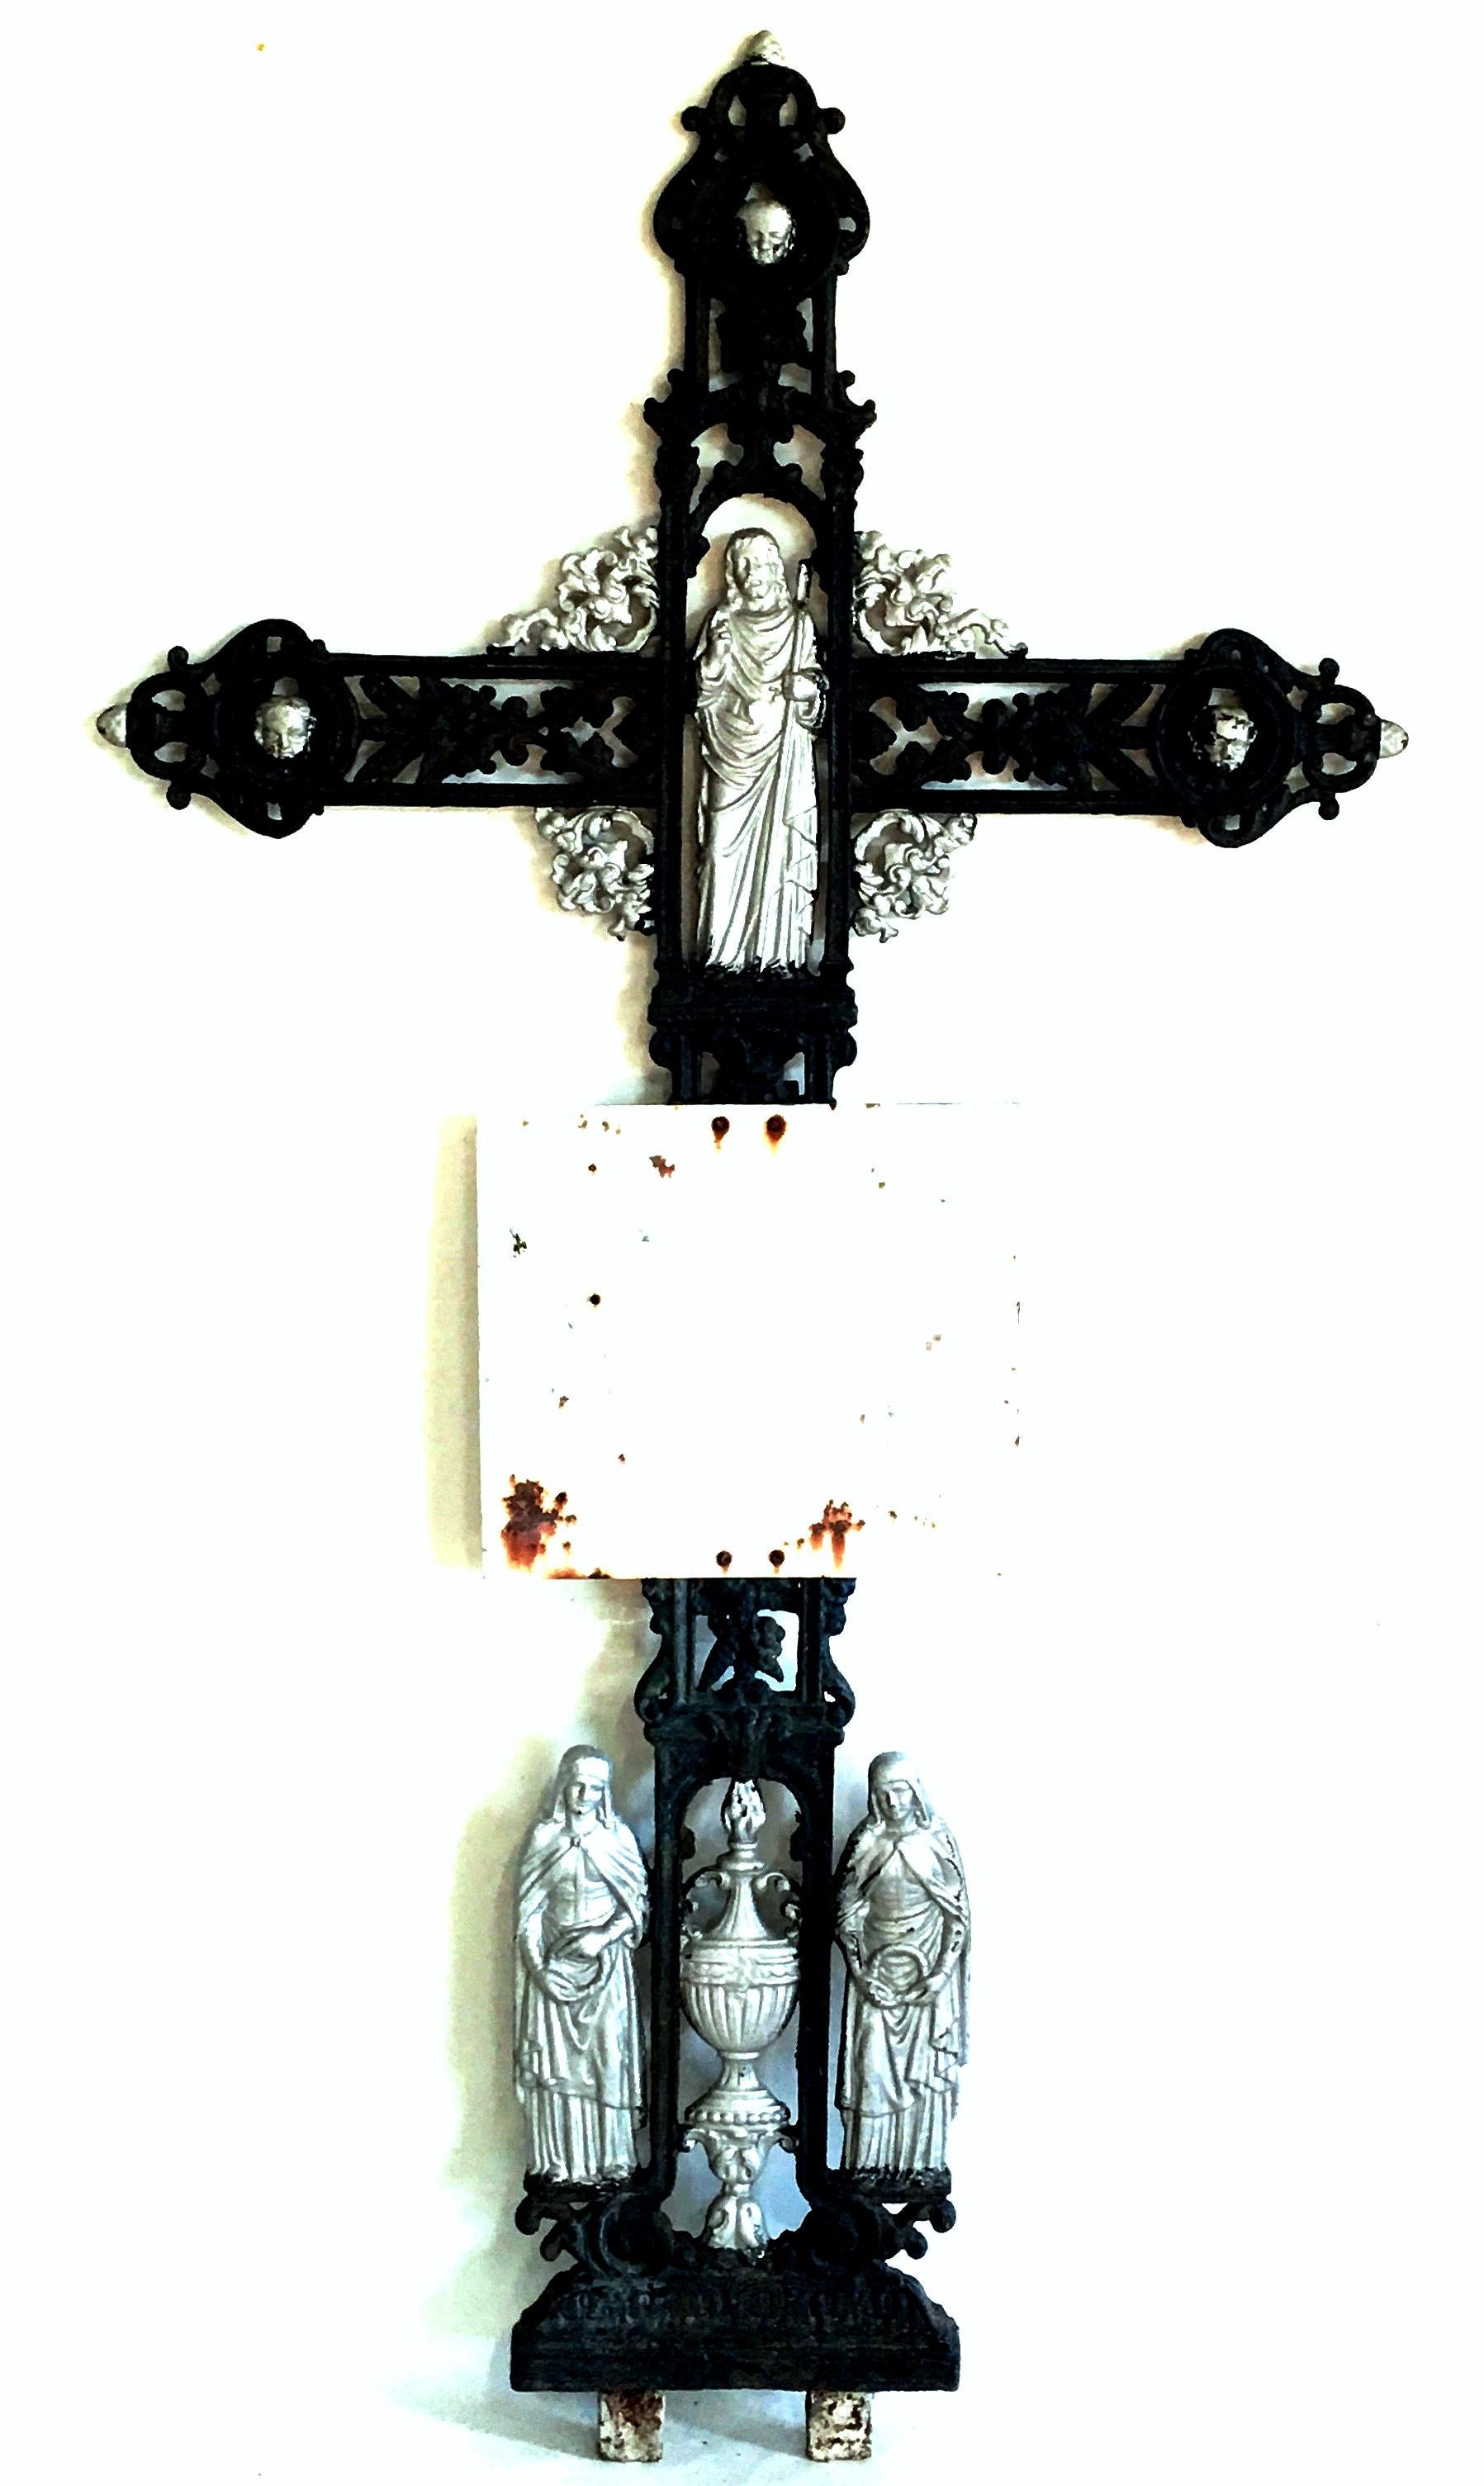 Antique French Painted Cast Iron Black & Silver Louis XVI Style Grave Marker-Crucifix. Features amazing high relief detail on both sides and is accented with silver leaf detail. Depicting Jesus as a Shepard Louis XVI design elements. Mask faces